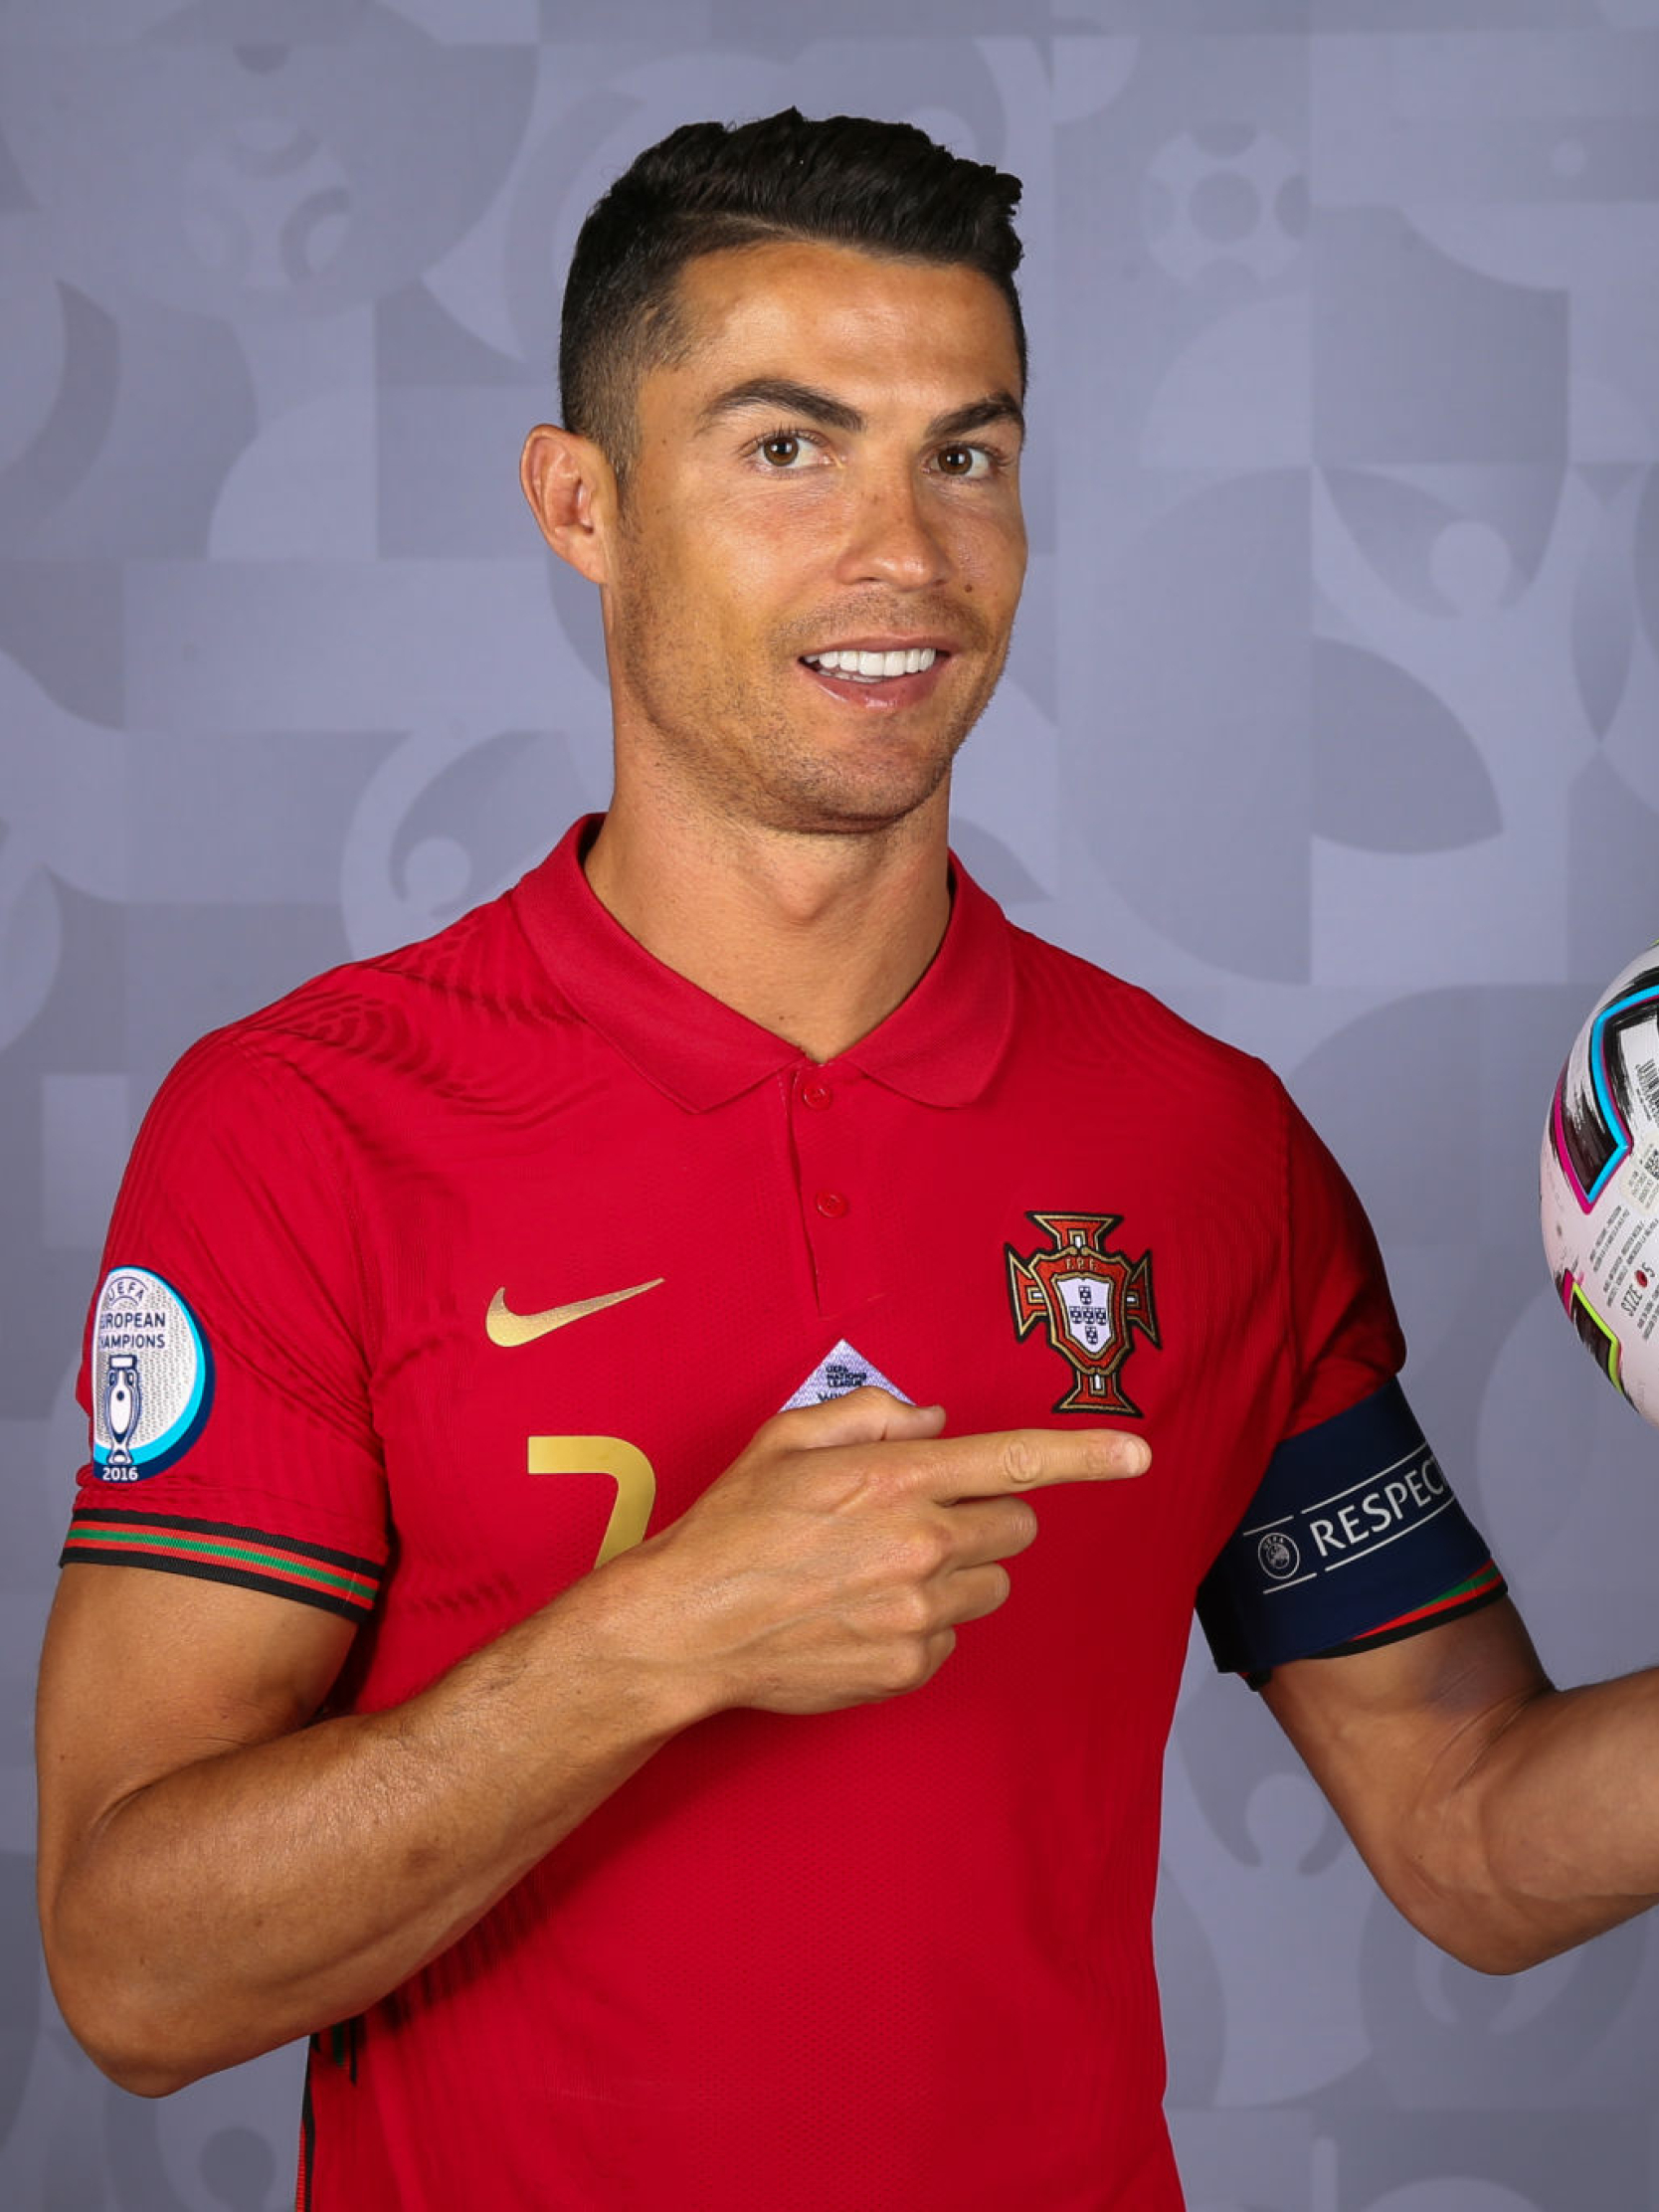 Cristiano Ronaldo Hd Wallpaper Background Image 2880x1800 Images And